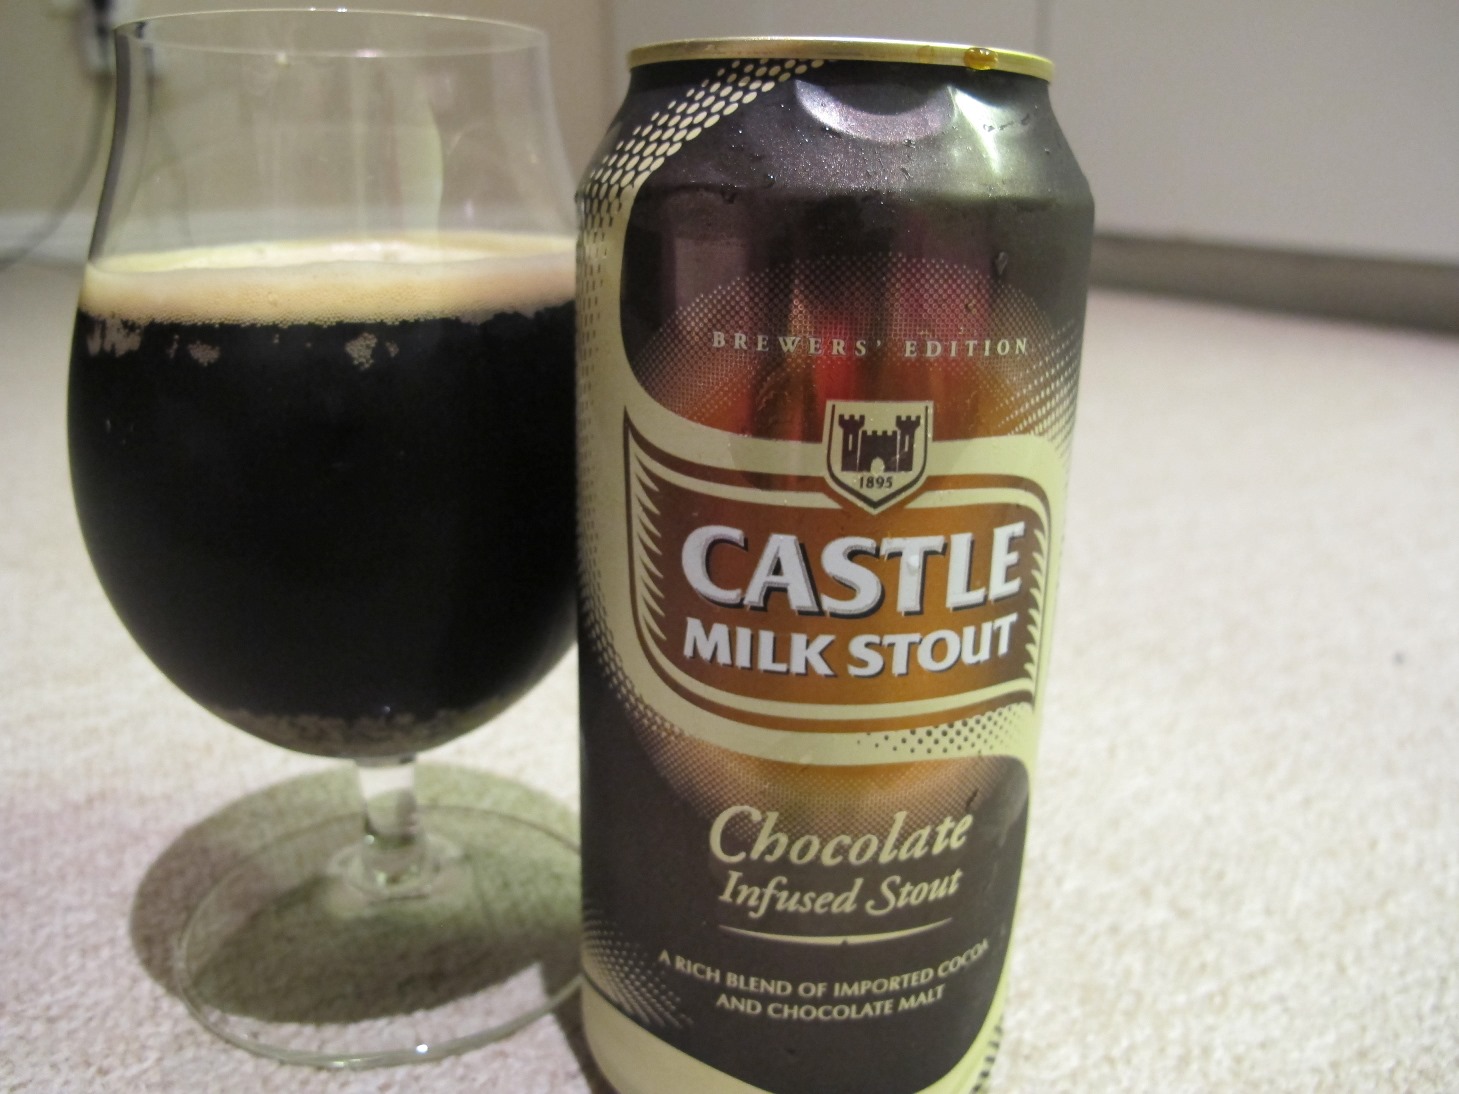 Beer review: Castle Milk Stout Chocolate